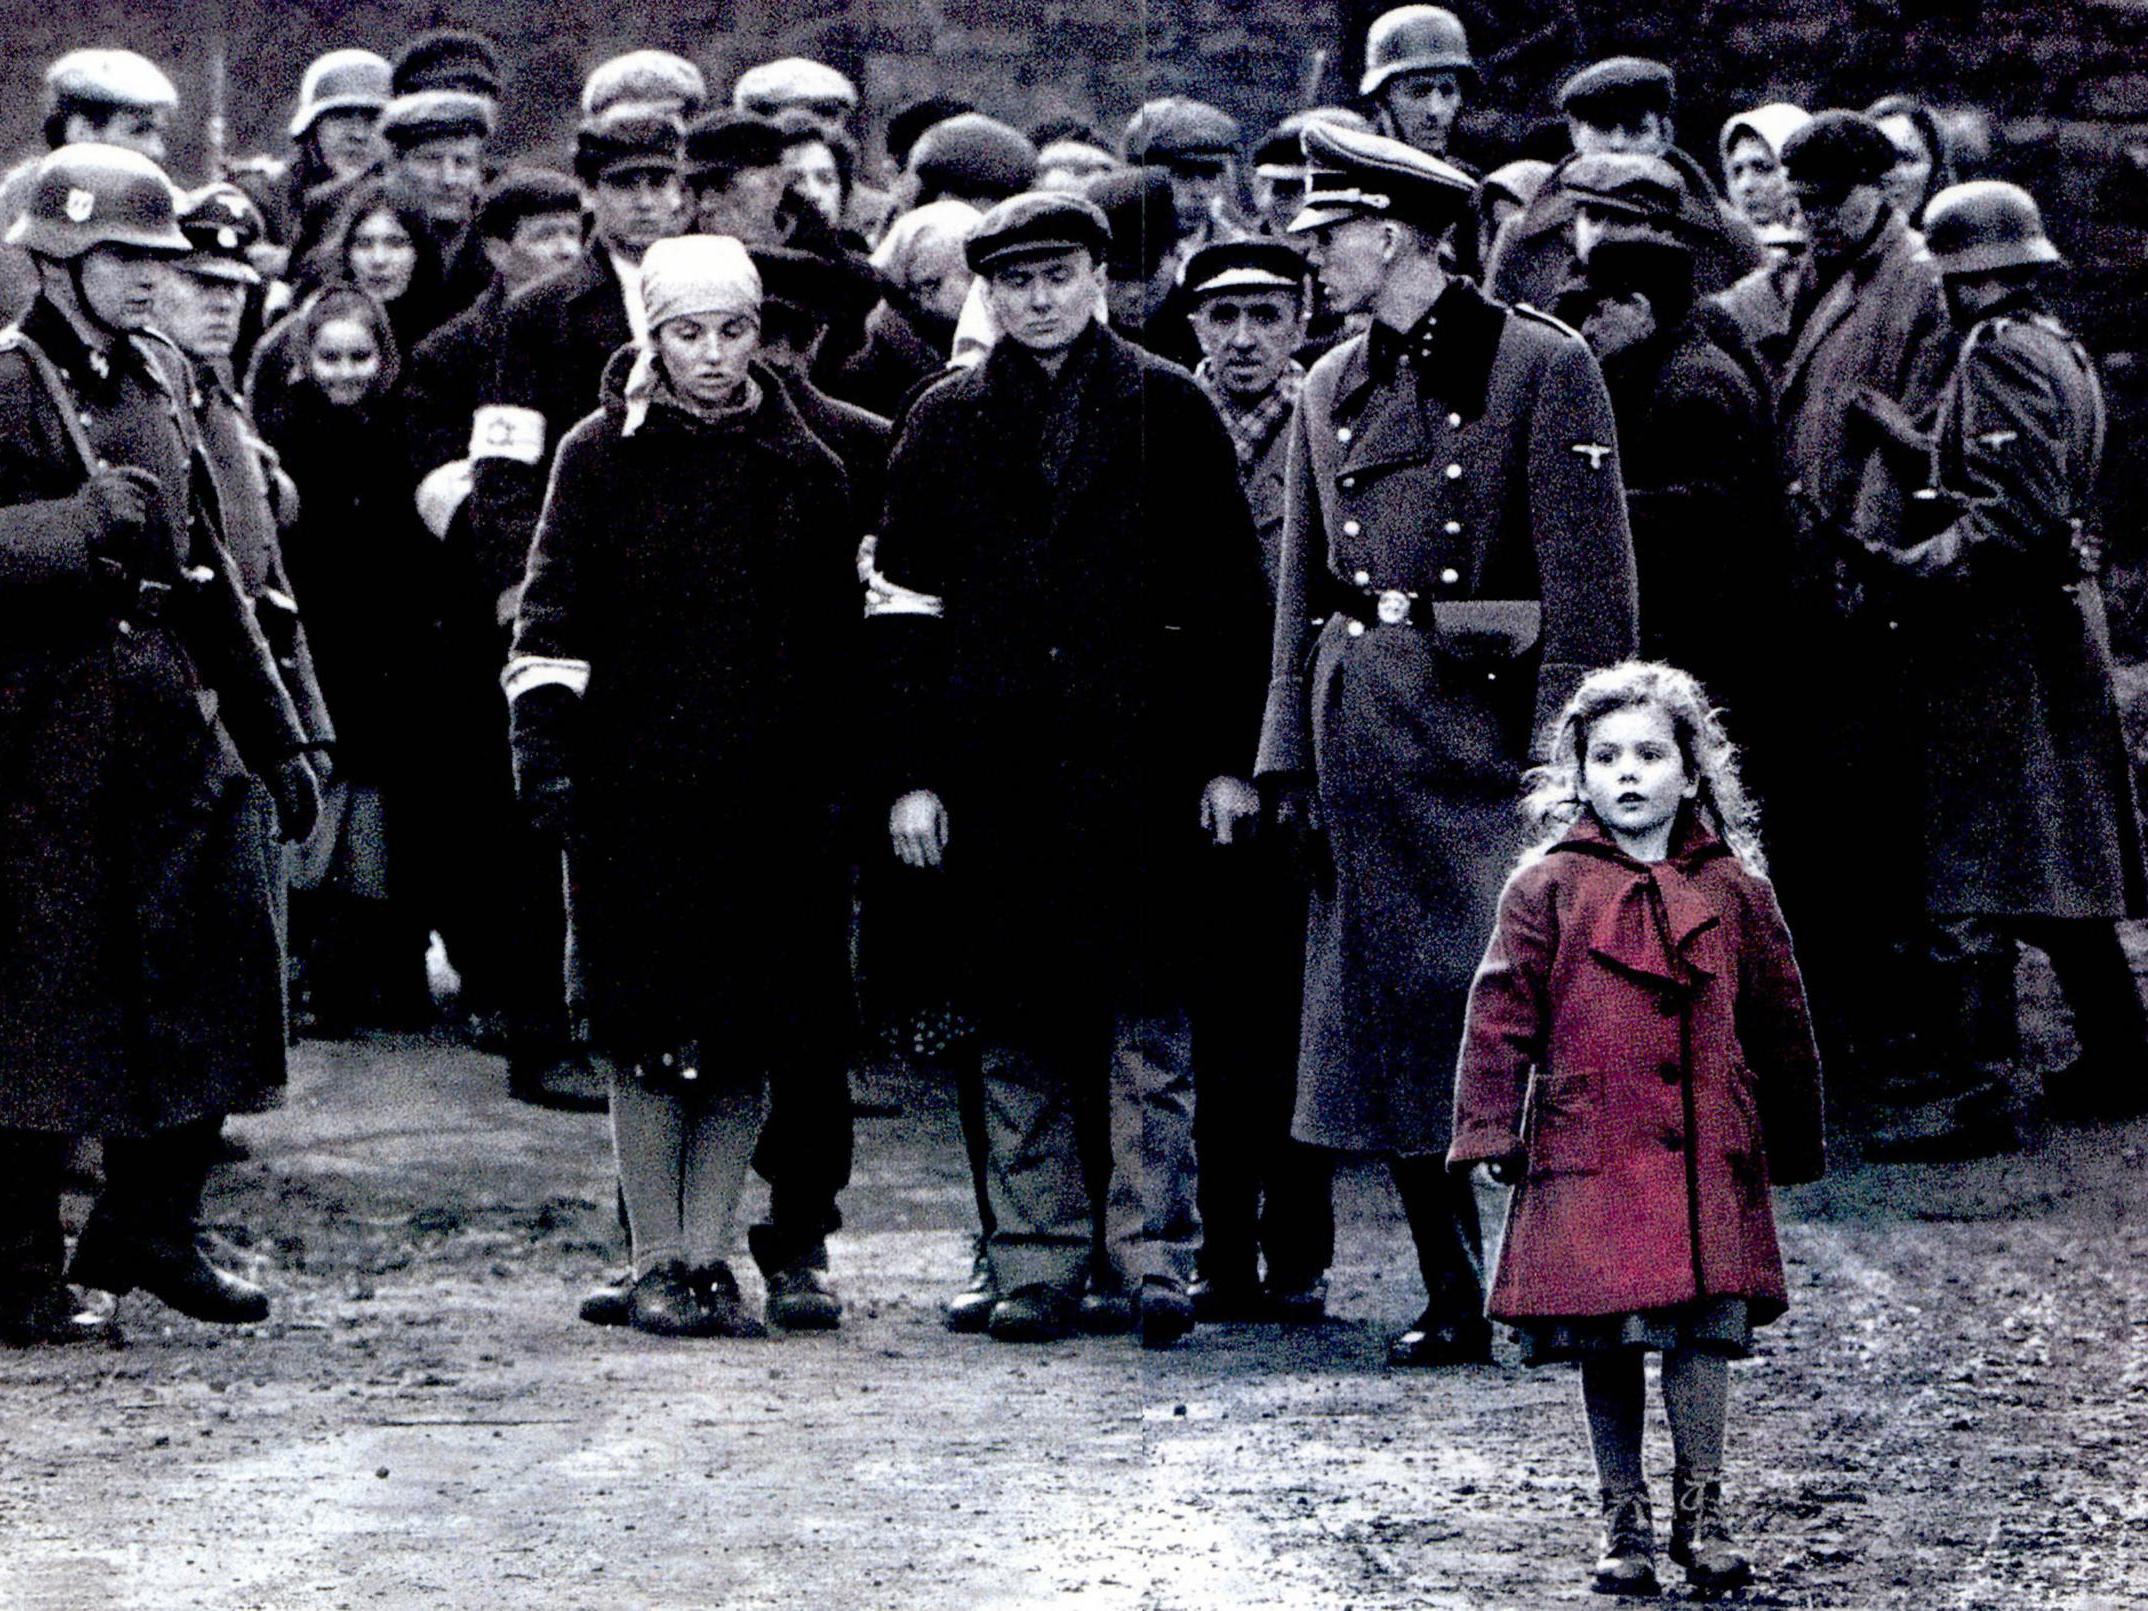 ‘Schindler’s List’ had been Spielberg’s ultimate grail for decades